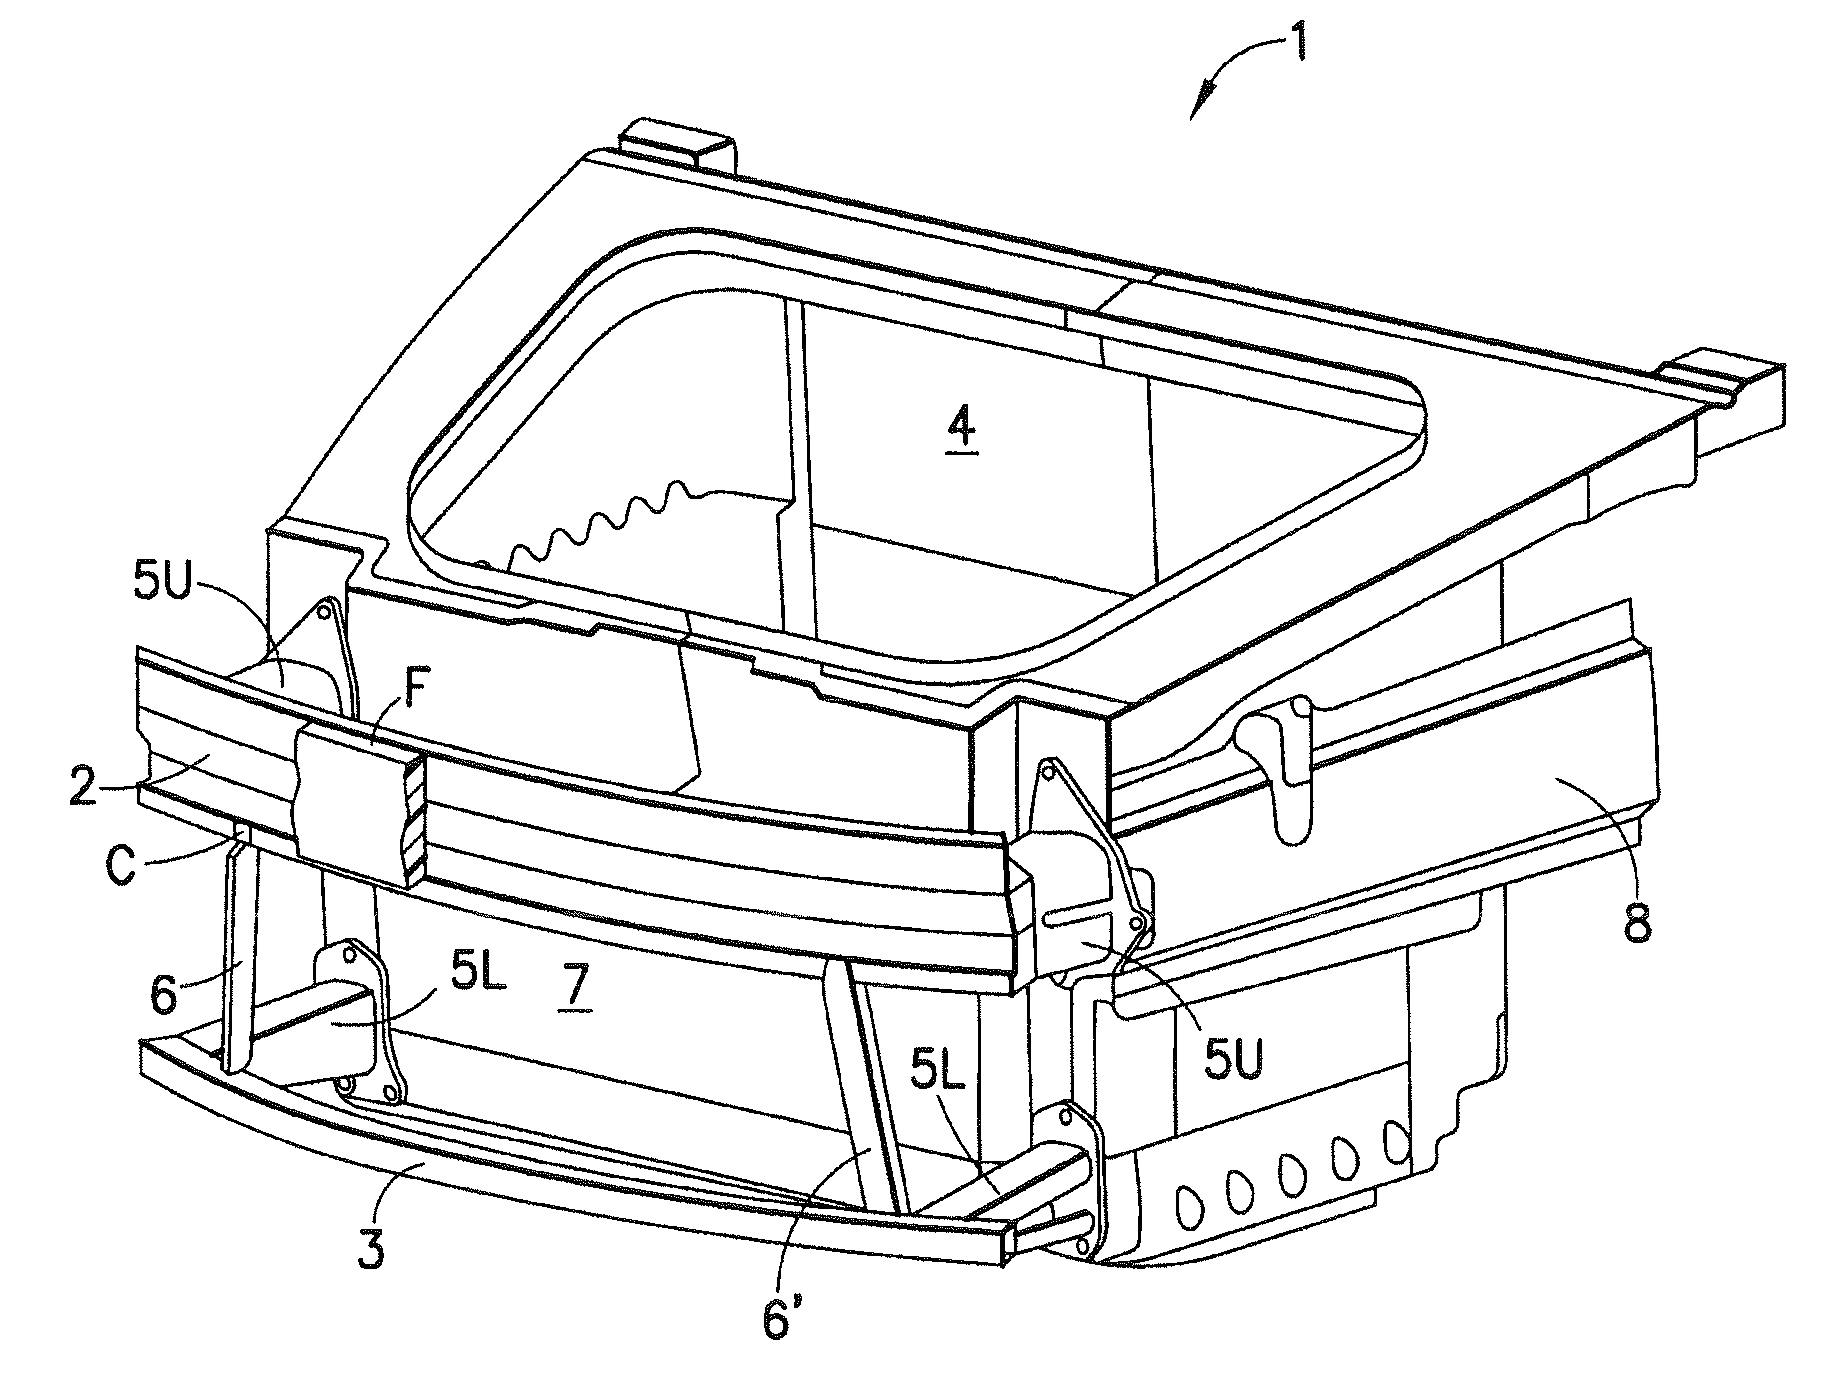 Front structure of a motor vehicle